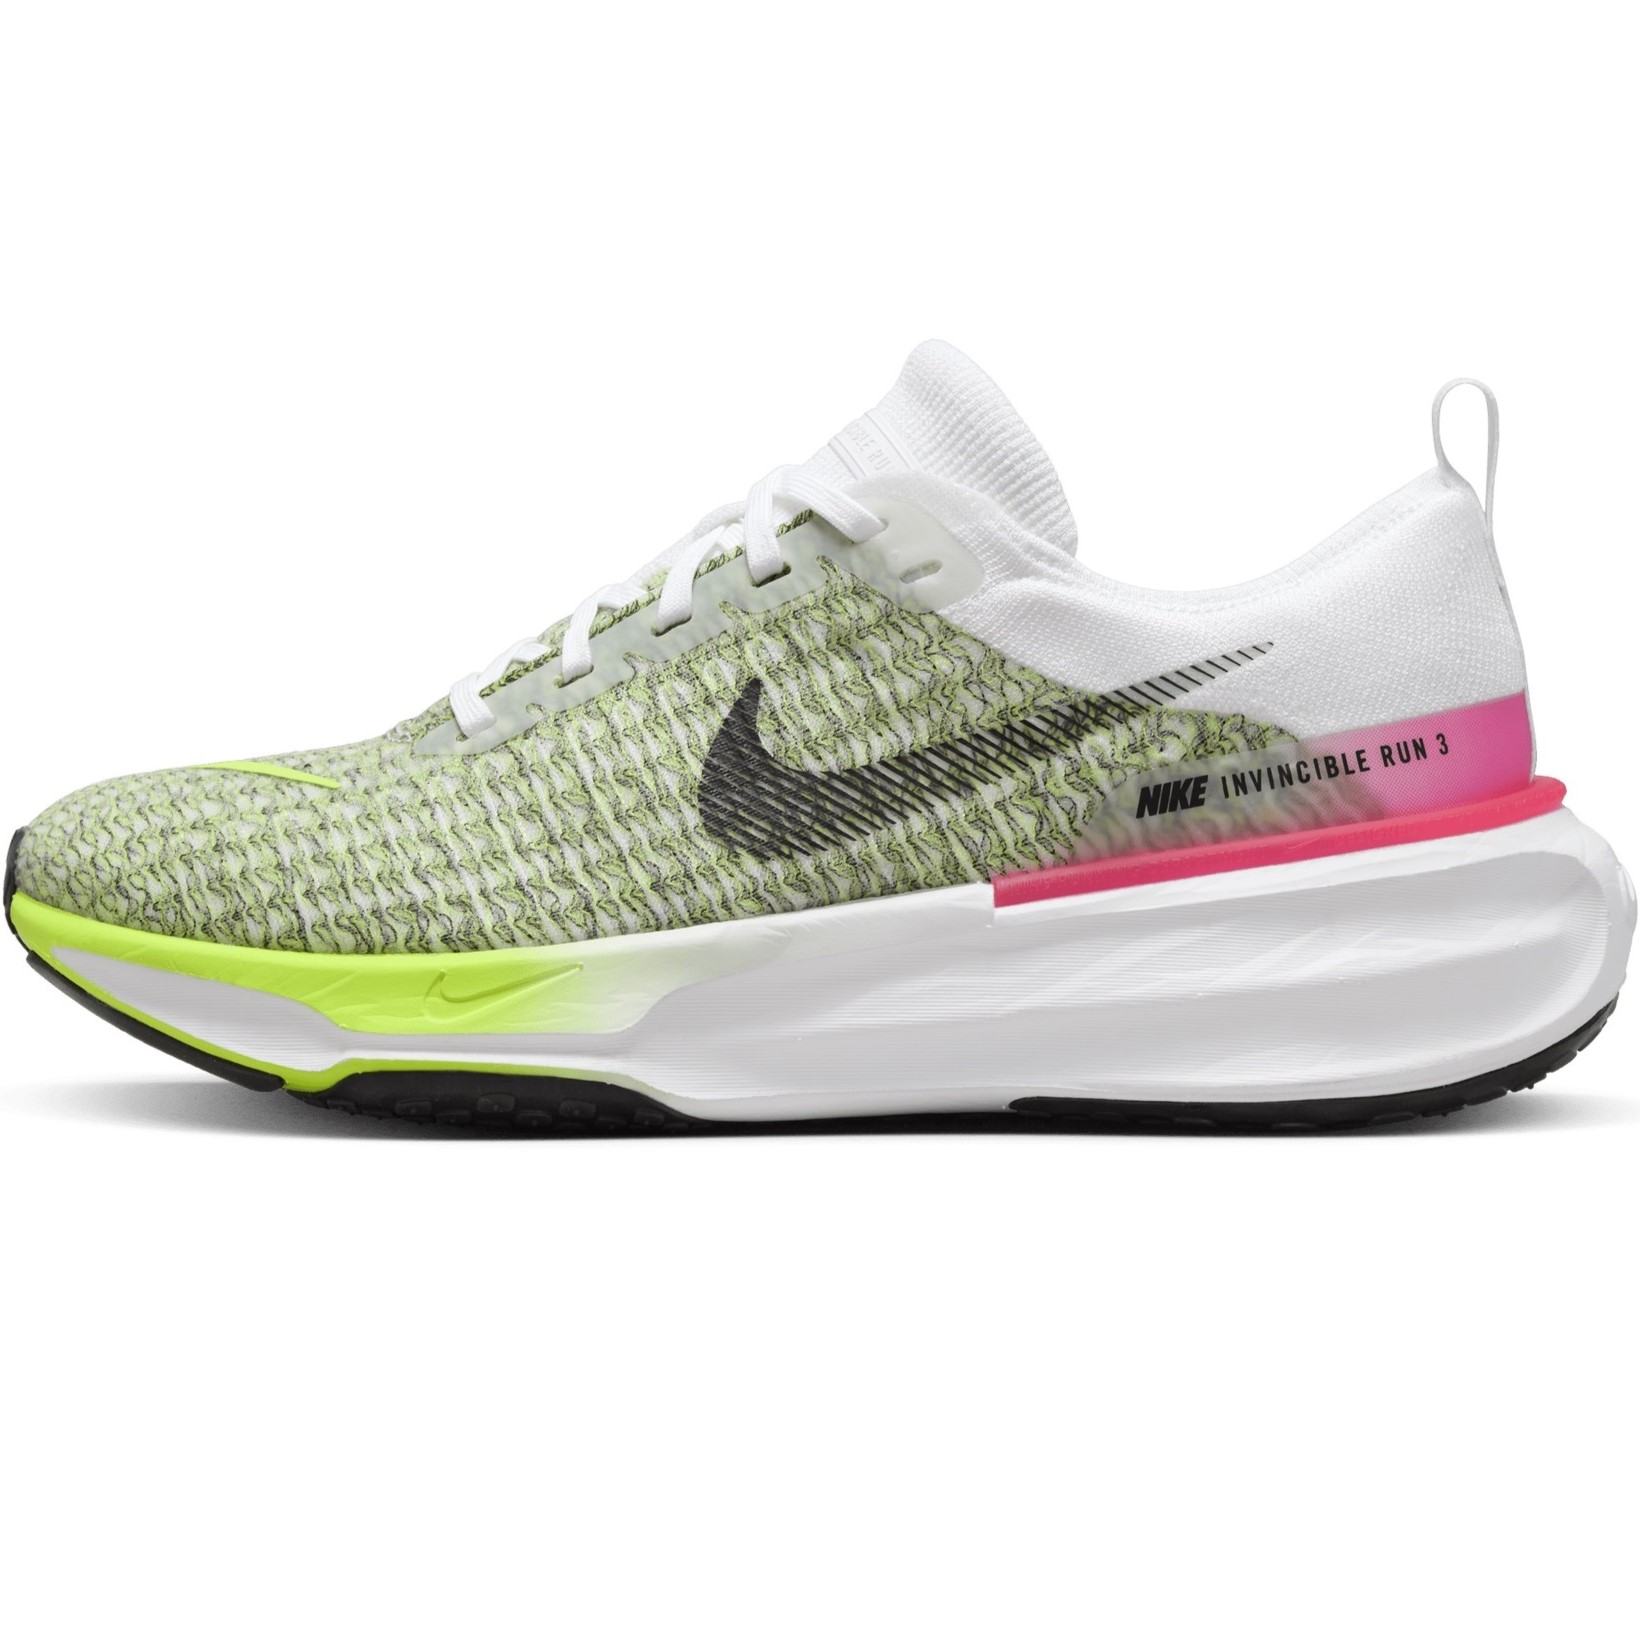 GIÀY NIKE NỮ WOMENS ZOOMX INVINCIBLE 3 ROAD RUNNING SHOES WHITE VOLT HYPER PINK FN6821-100 5